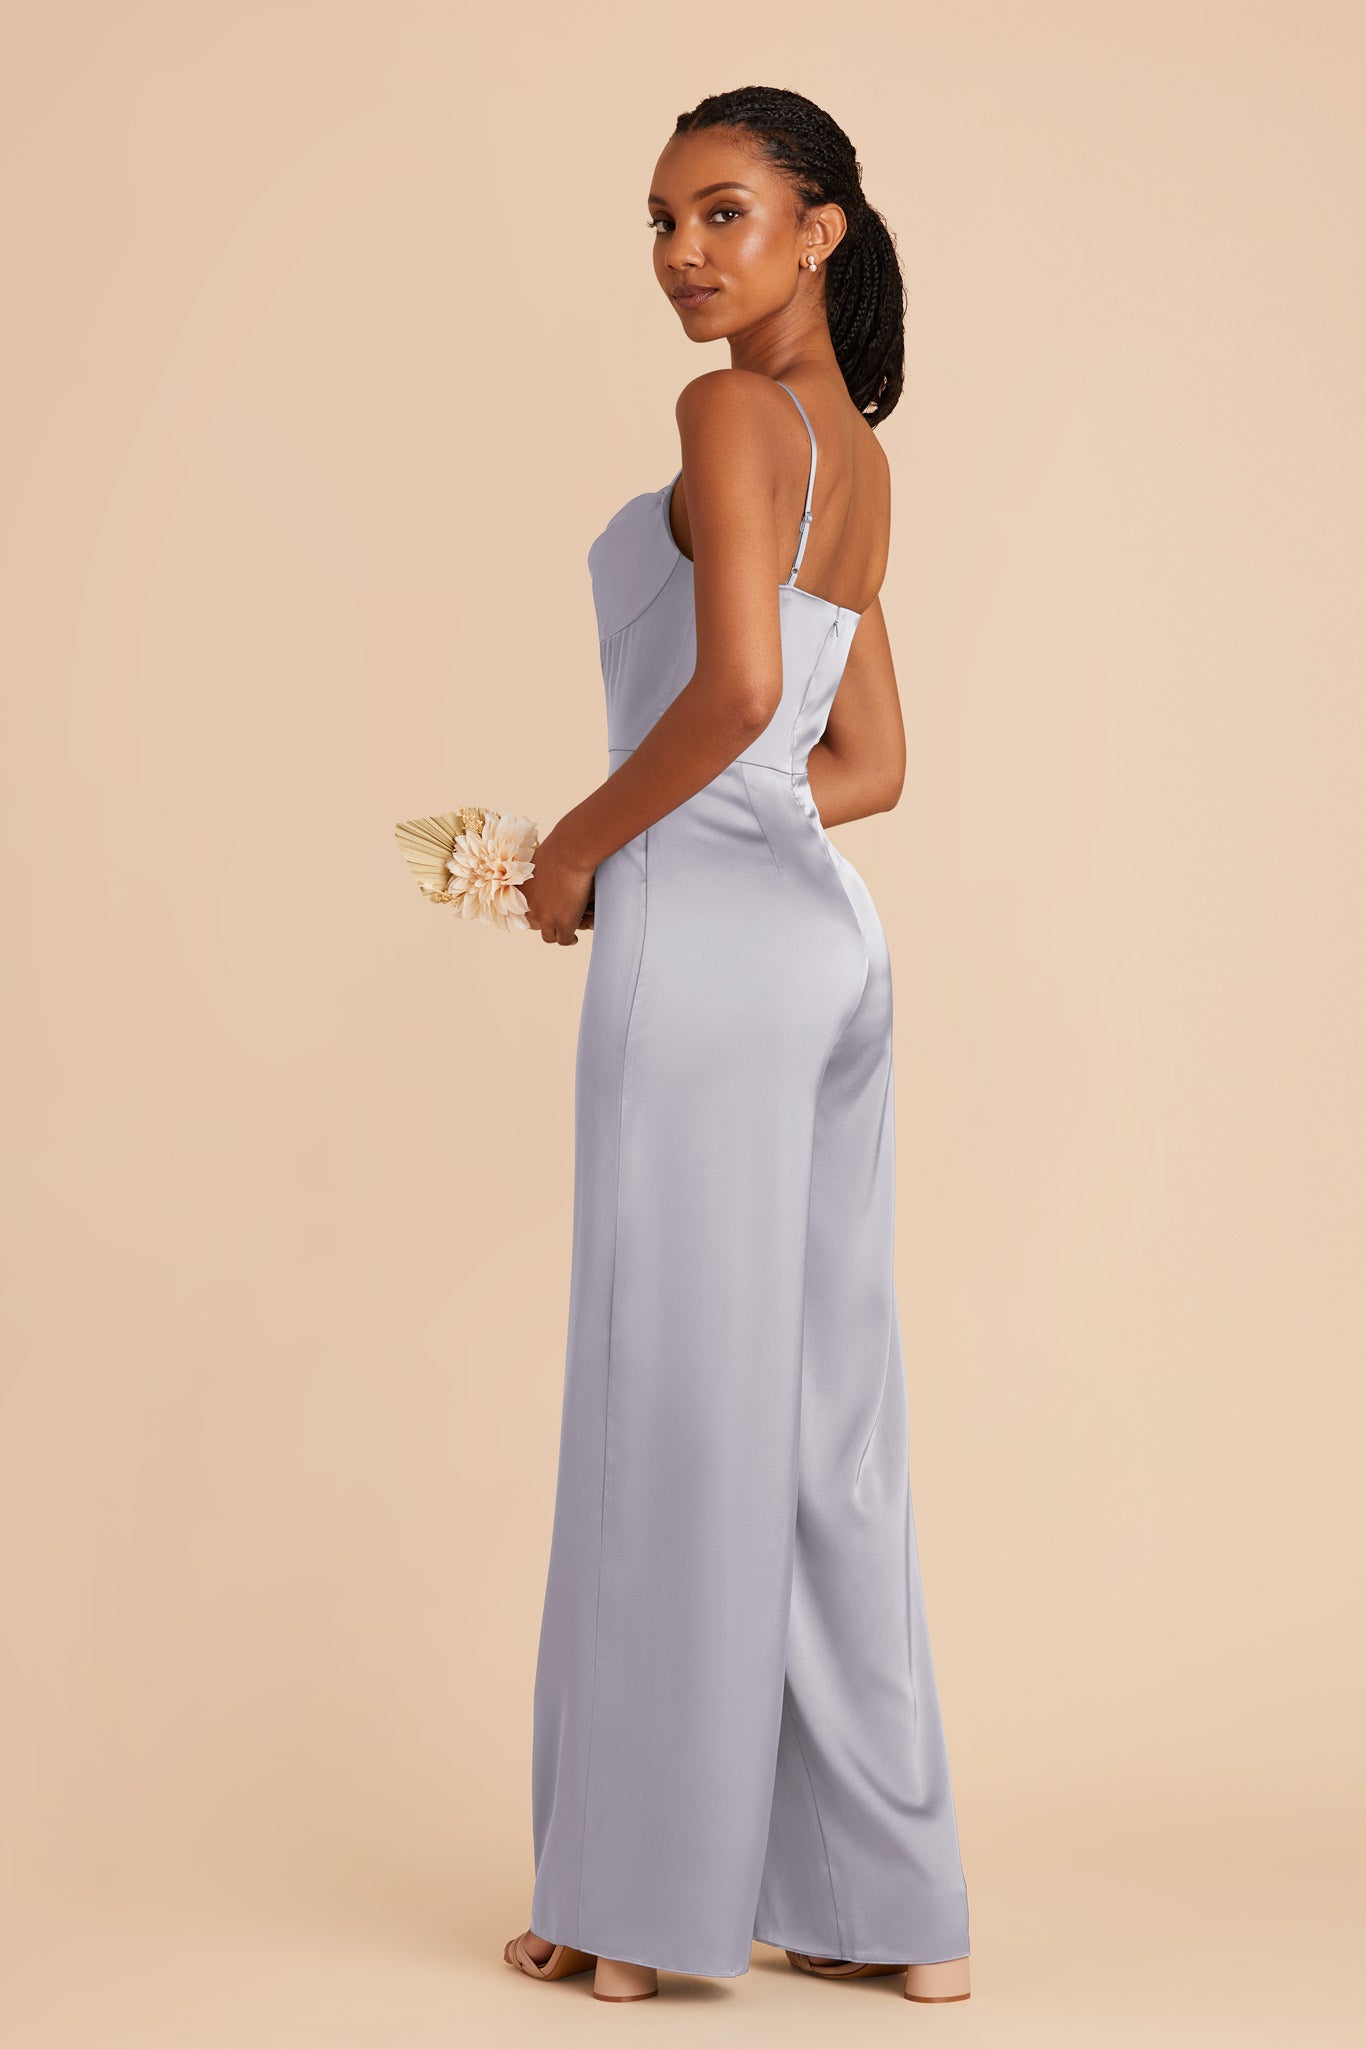 Periwinkle Blue Donna Matte Satin Bridesmaid Jumpsuit by Birdy Grey